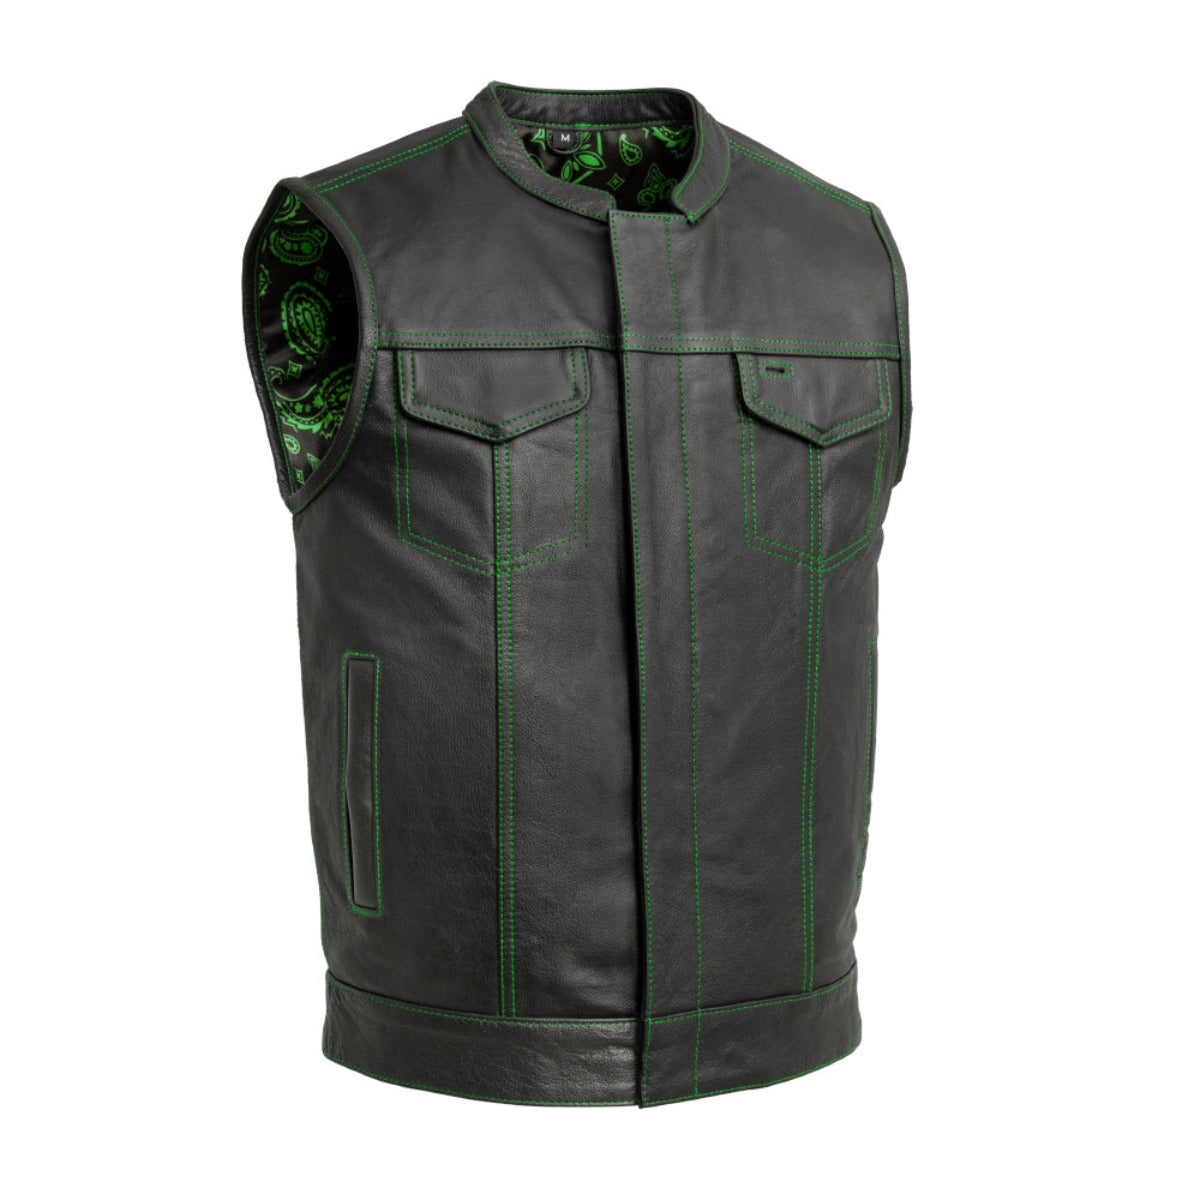 First Manufacturing Men's The Cut Motorcycle Leather Vest, Black/Green